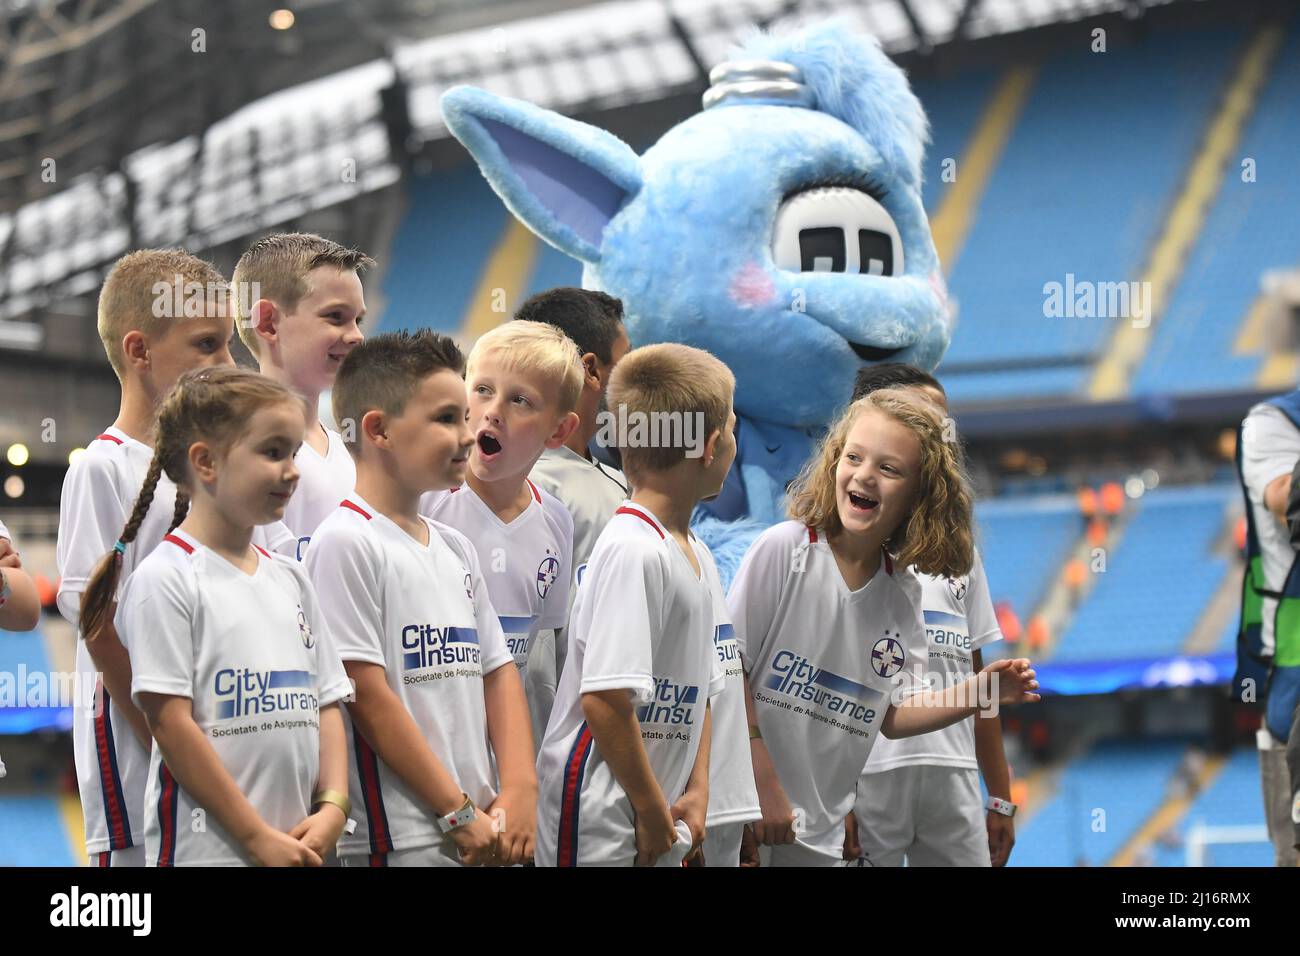 MANCHESTER, ENGLAND - AUGUST 24, 2016: The player escort kids pictured prior to the second leg of the 2016/17 UEFA Champions League tie between Manchester City (Engalnd) and FCSB (Romania) at Etihad Stadium. Copyright: Cosmin Iftode/Picstaff Stock Photo